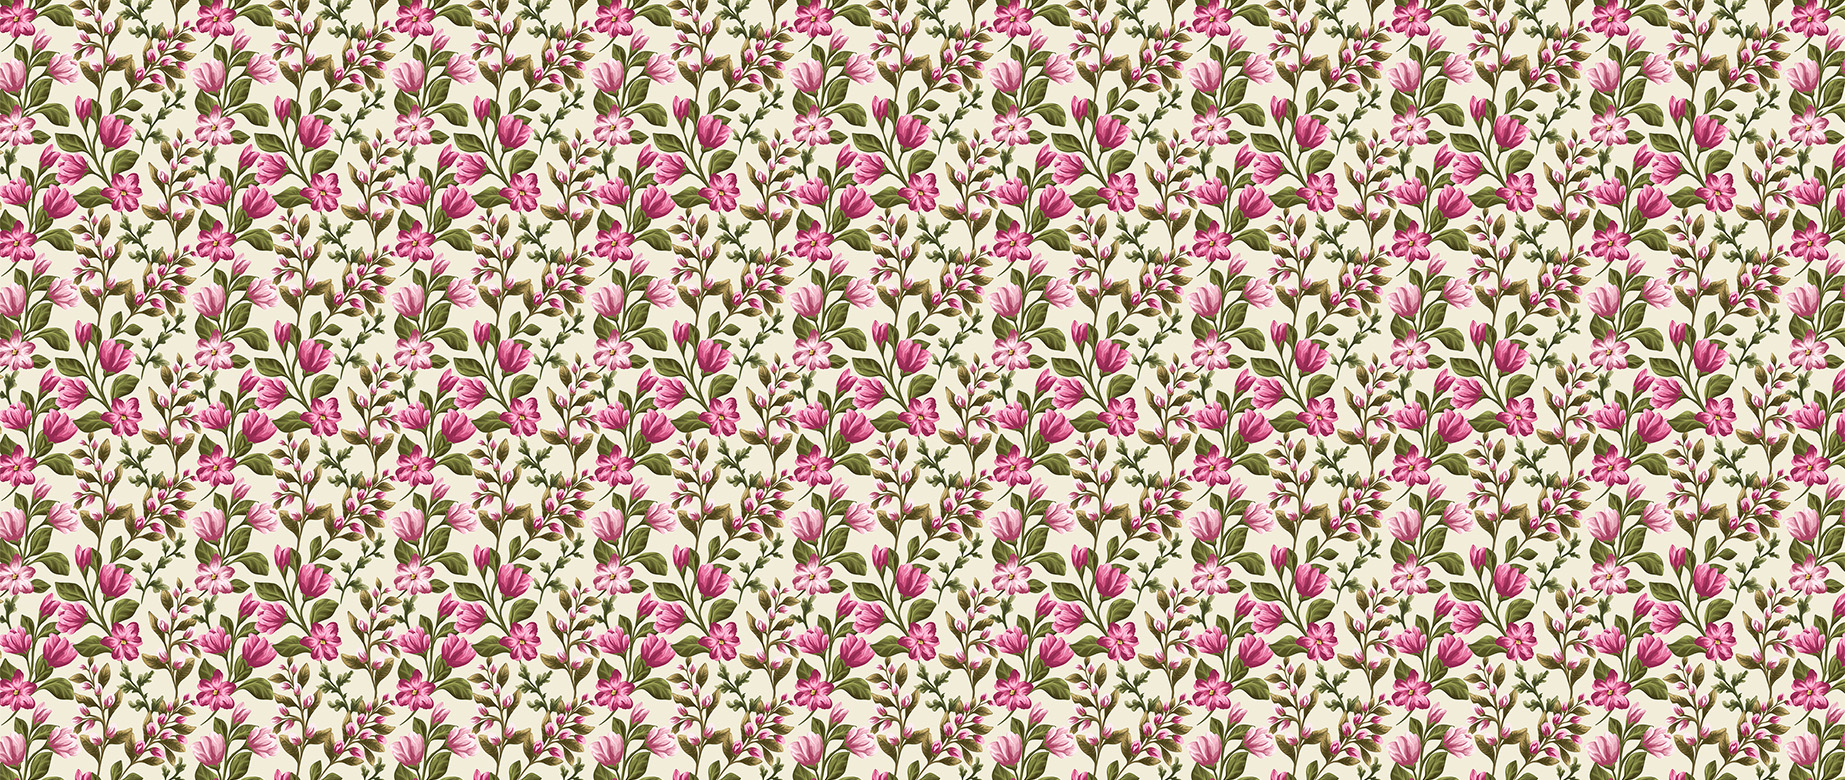 pink-flowers-green-leaves-wallpapers-full-wide-view